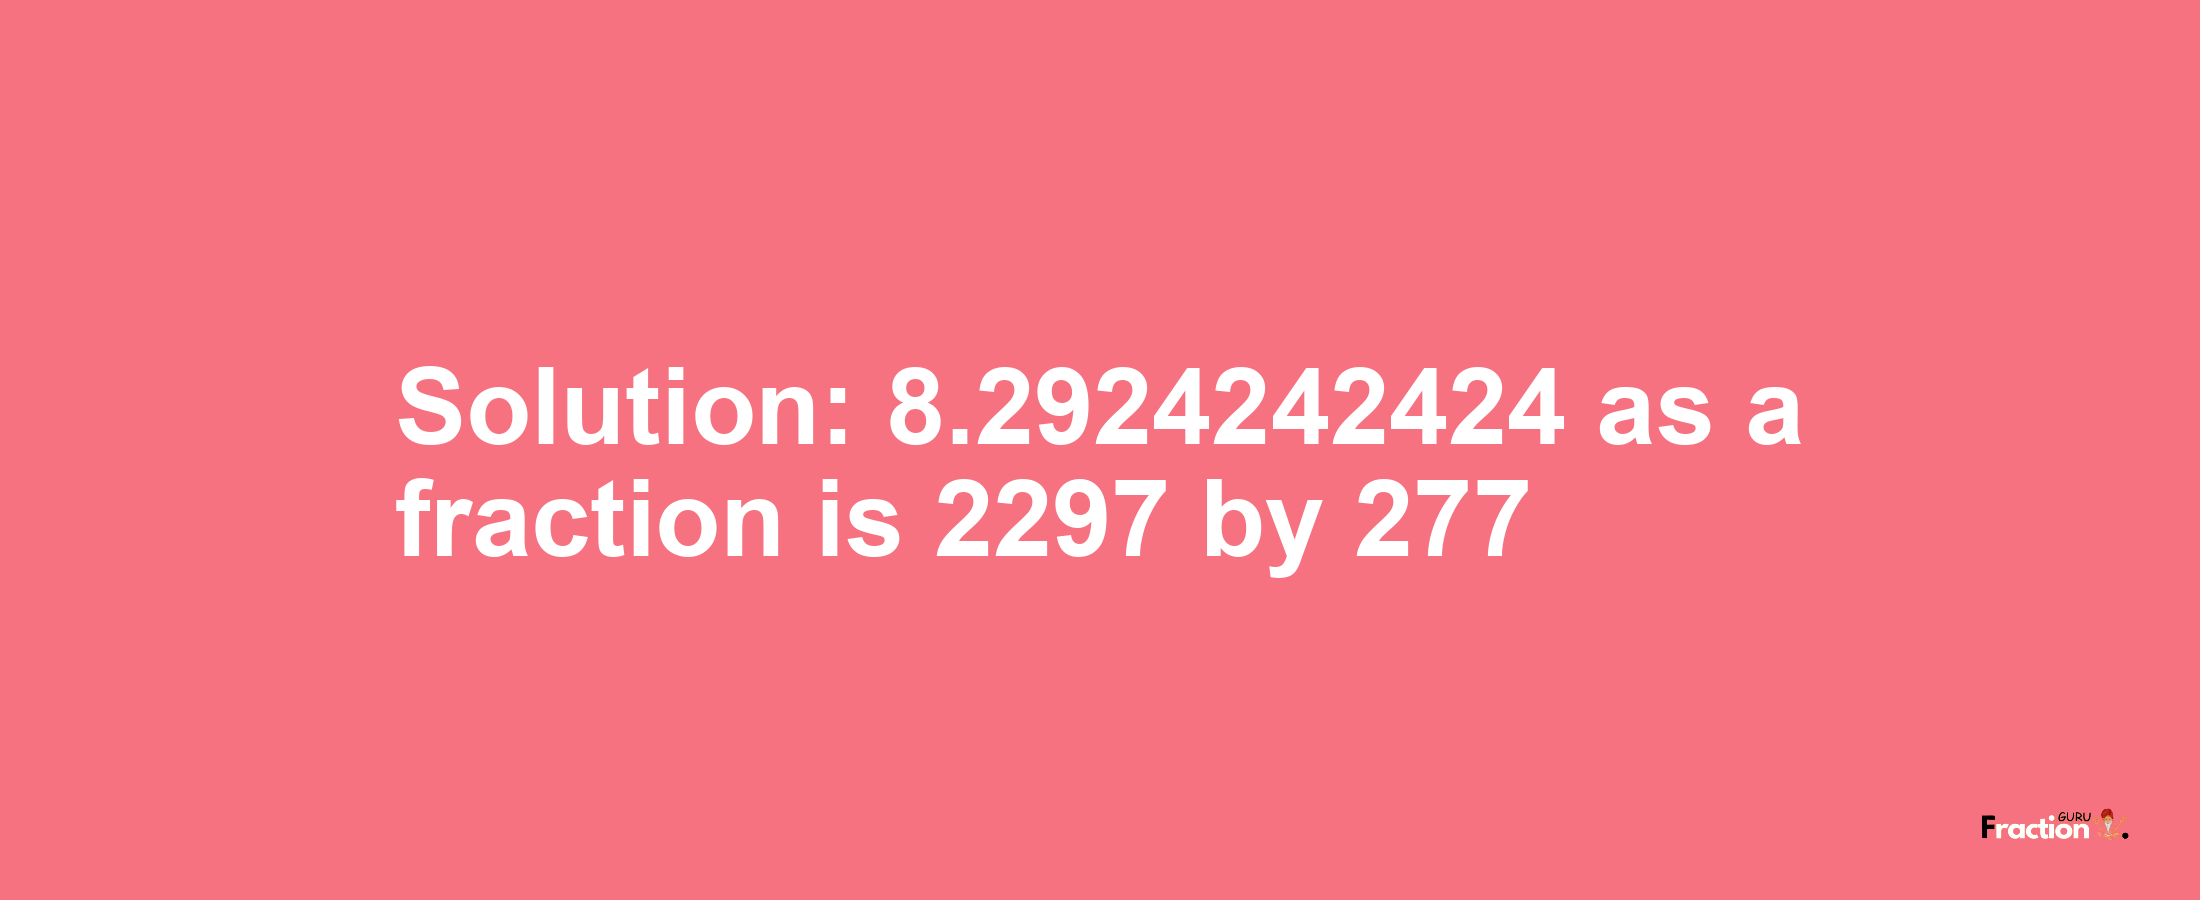 Solution:8.2924242424 as a fraction is 2297/277